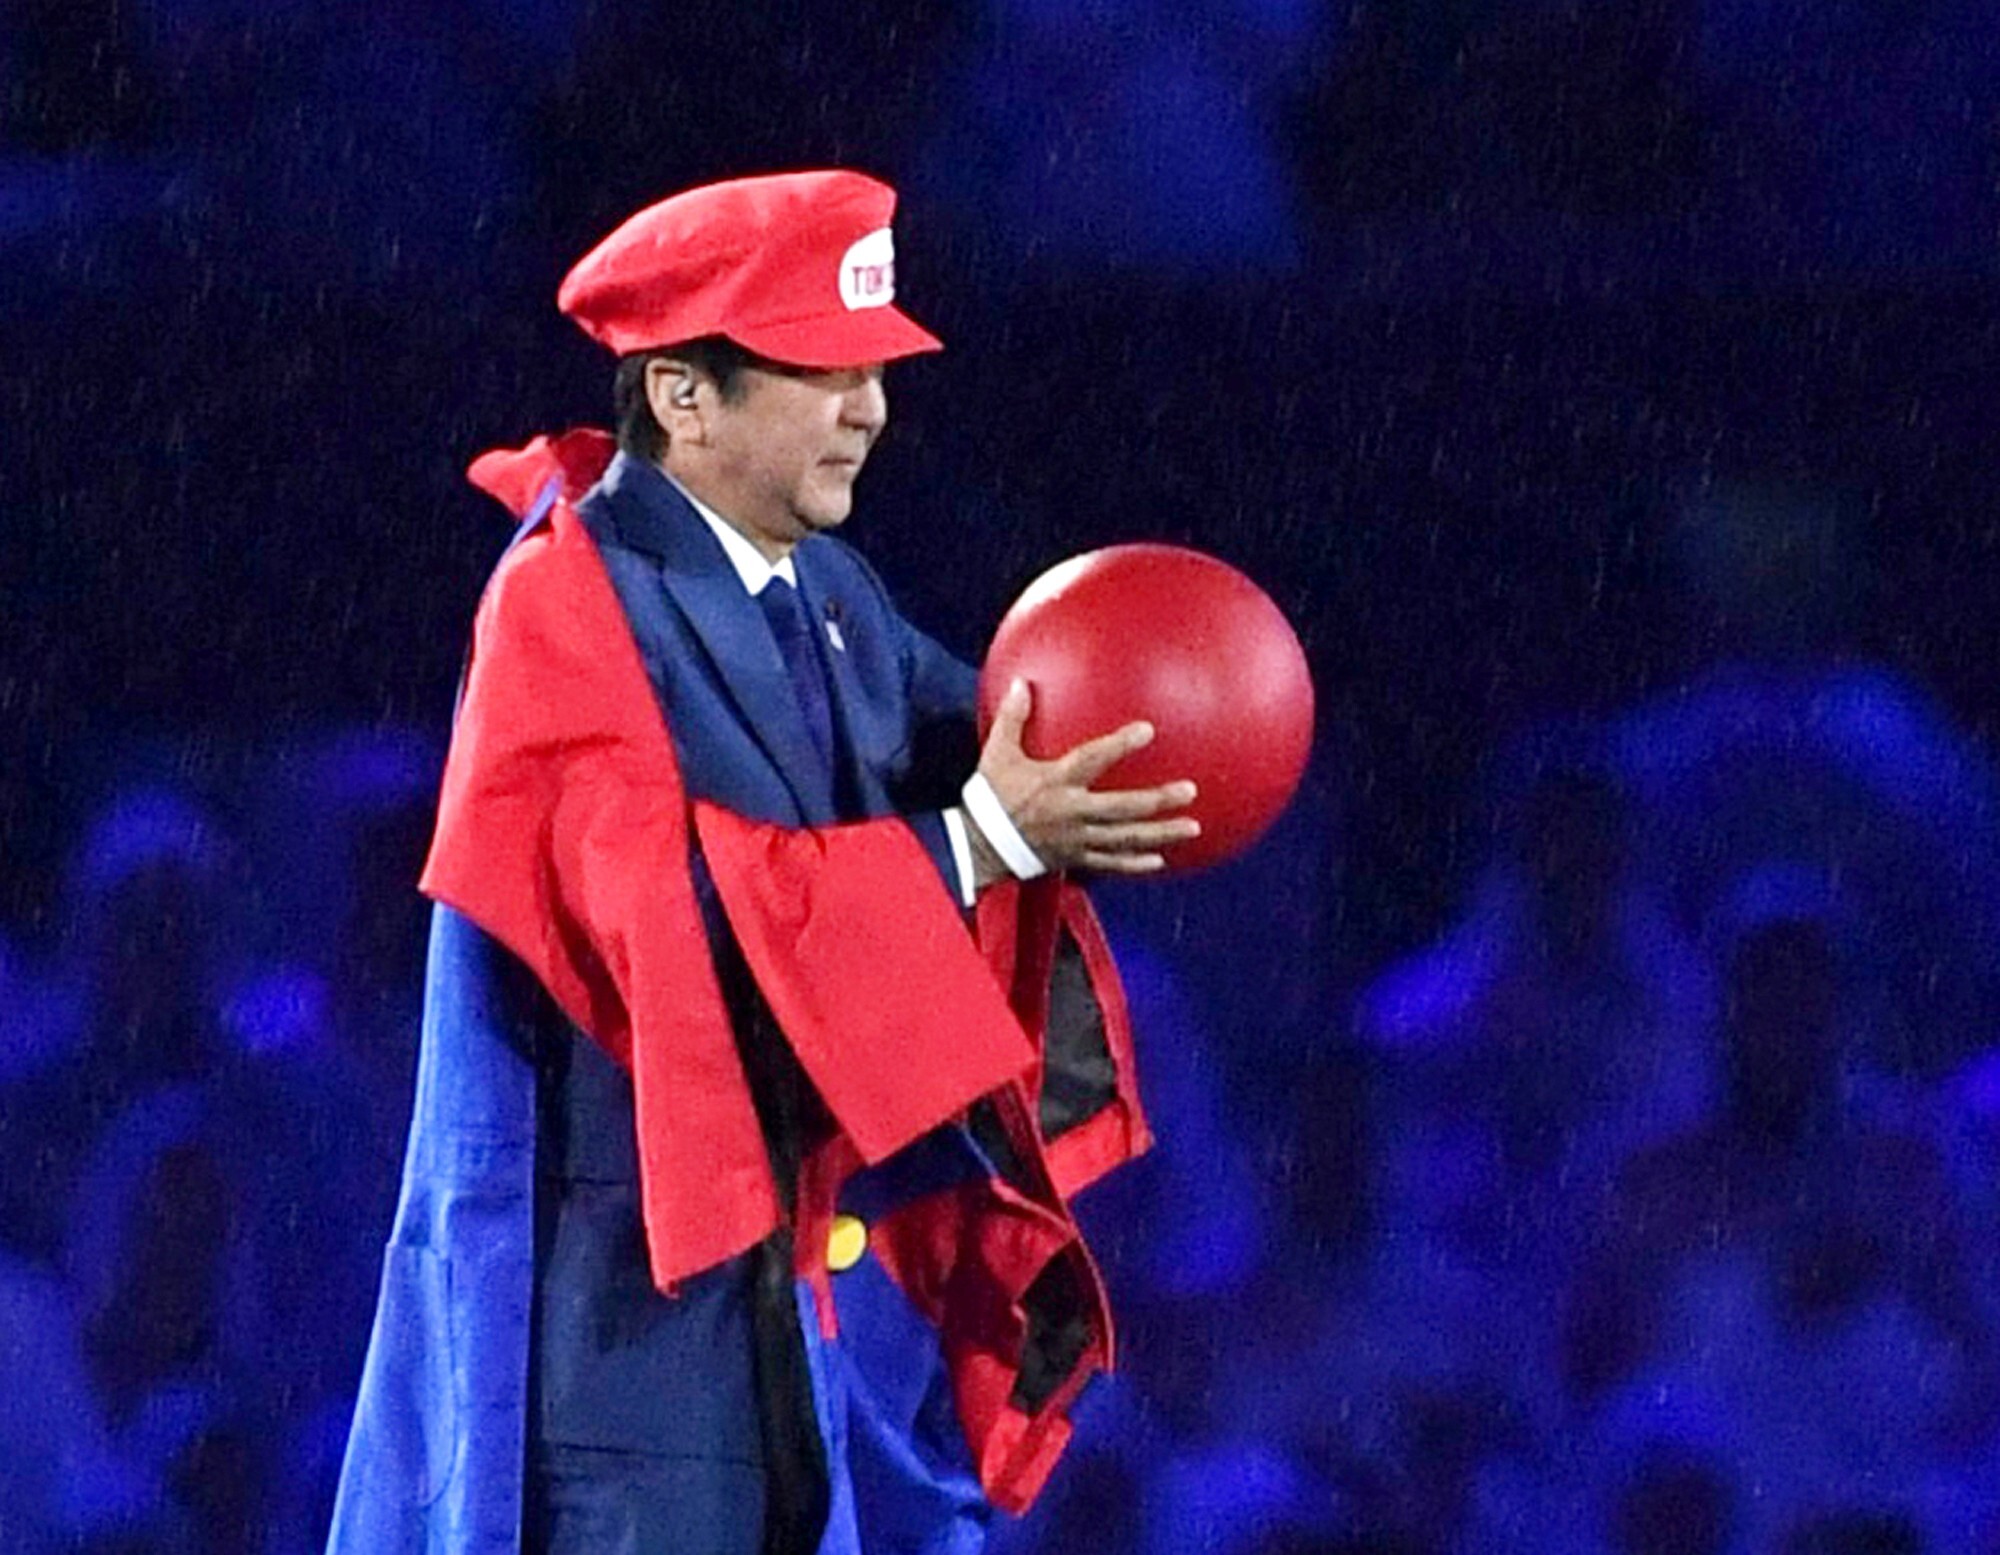 Shinzo Abe appears as the Nintendo game character Super Mario during the closing ceremony at the 2016 Summer Olympics in Rio de Janeiro, Brazil. Photo: Kyodo/AP